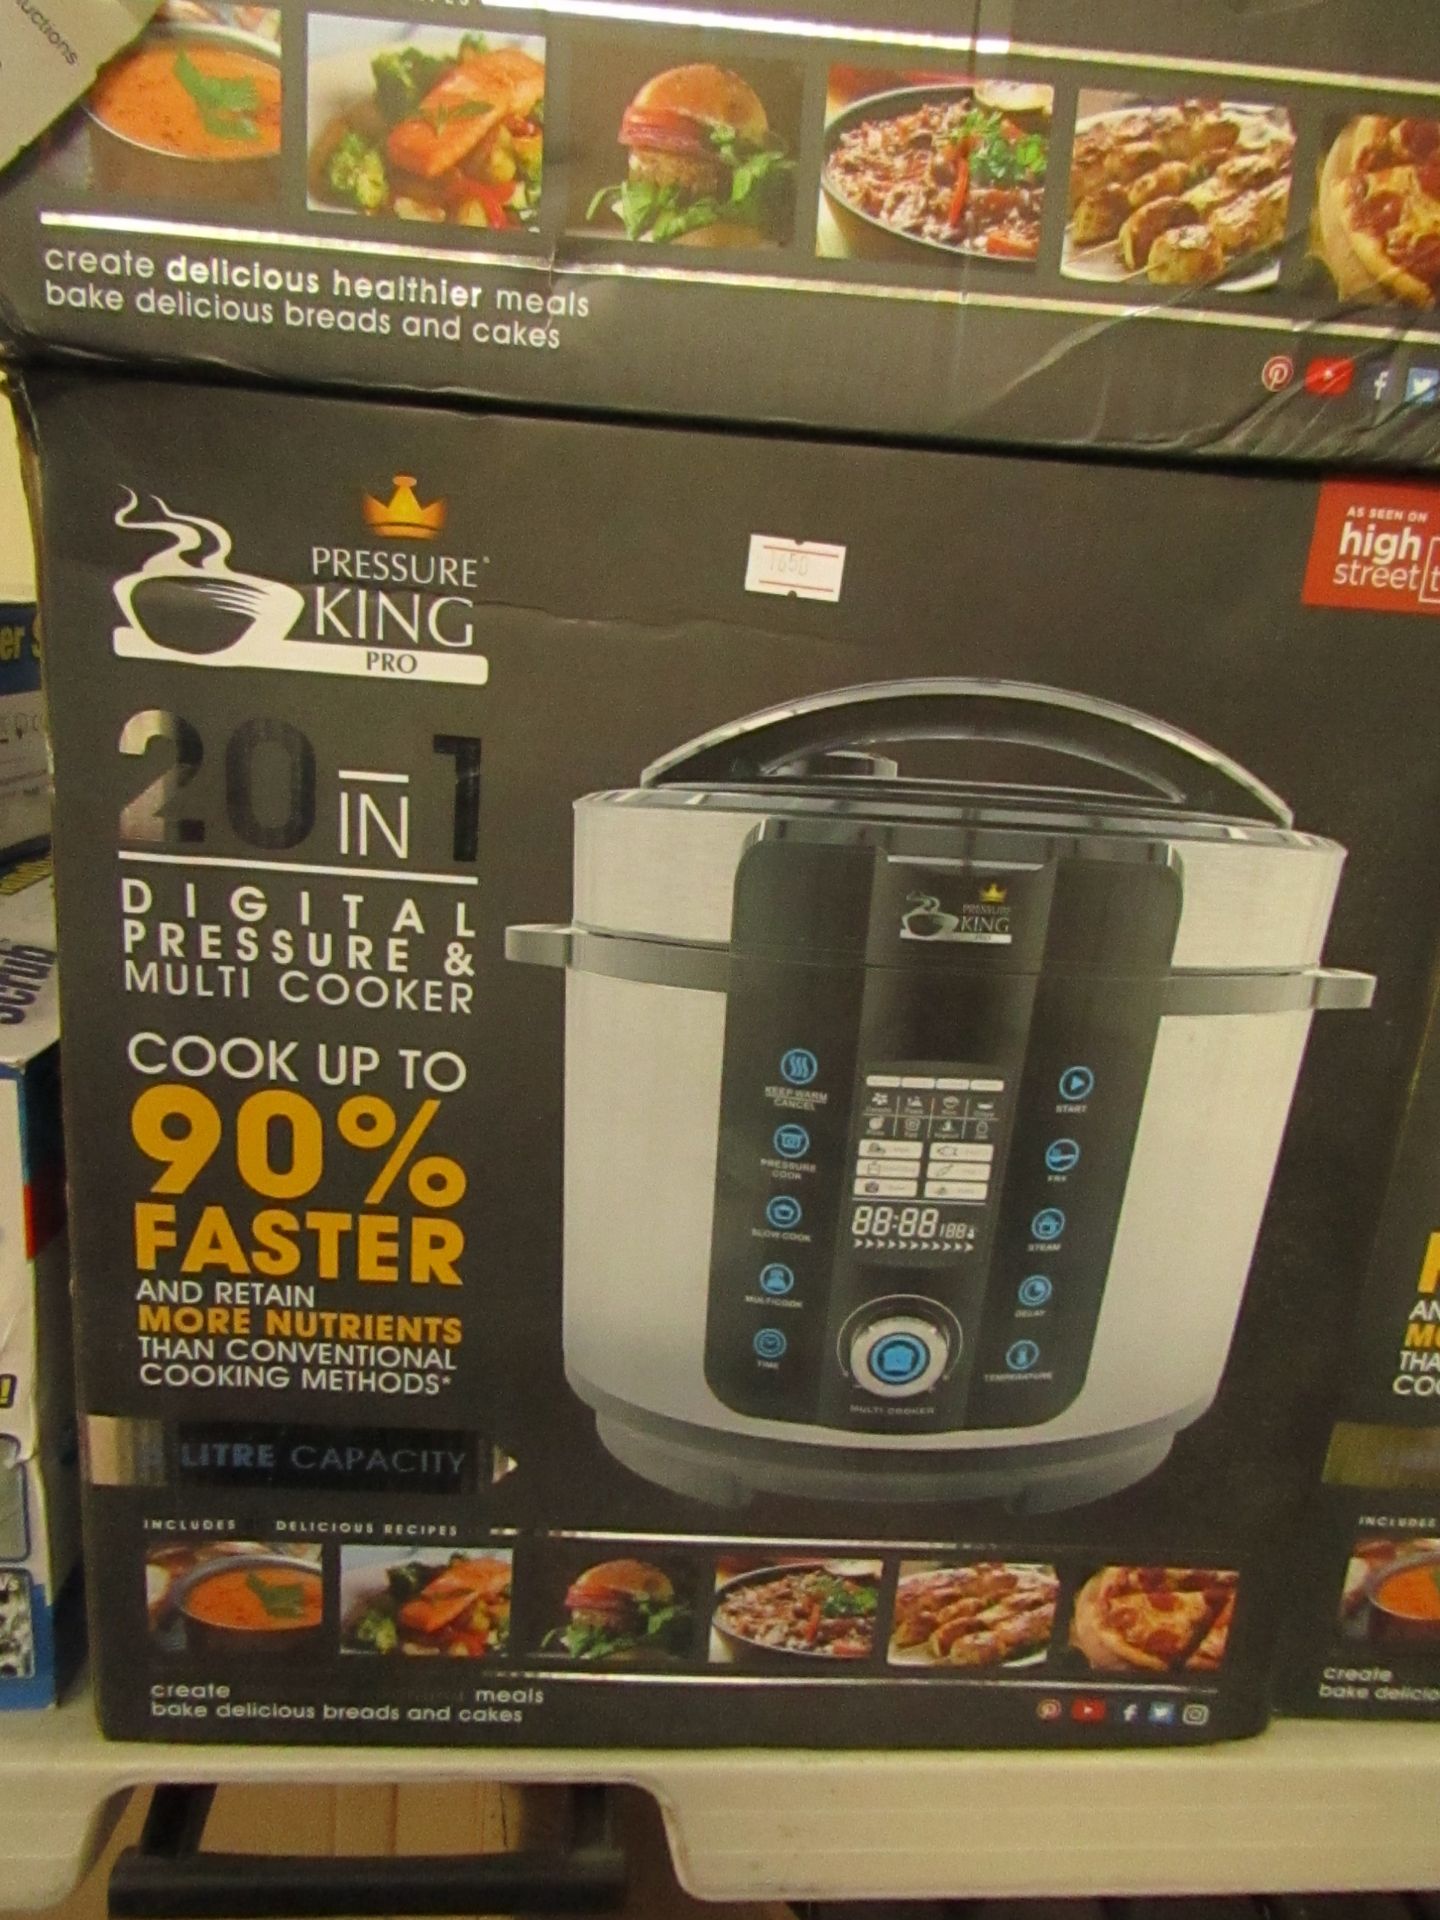 Pressure King Pro 20 in 1 Multi Cooker. 6L. Boxed but unchecked.RRP £99.99 - Image 2 of 2